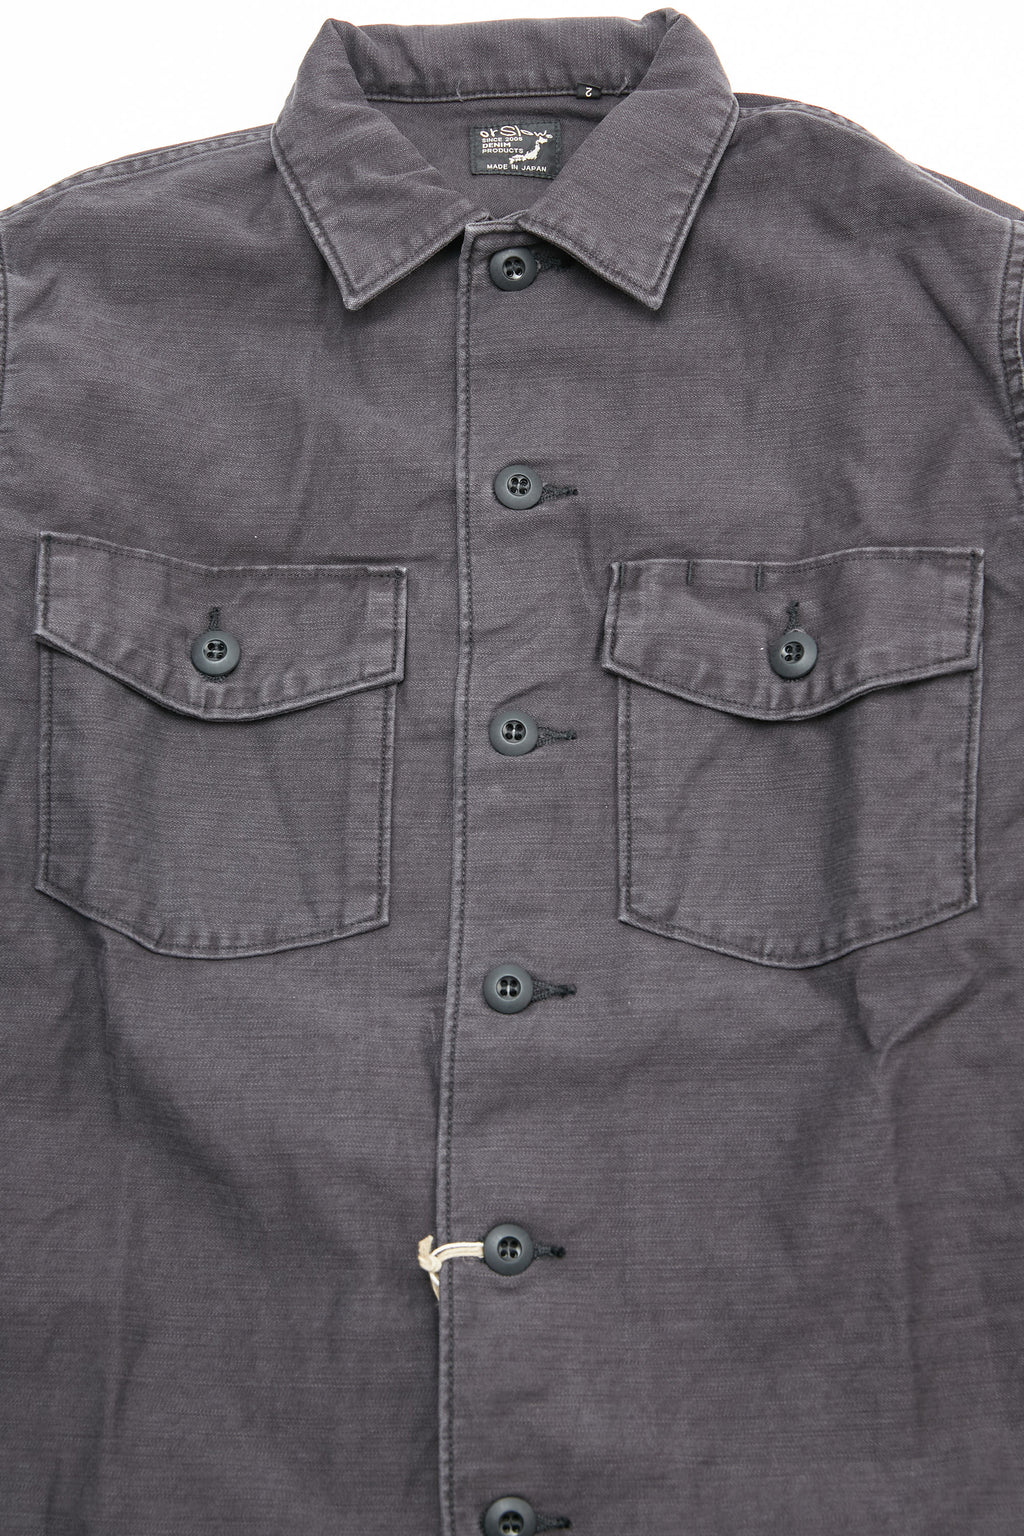 Orslow US Army Shirt - BLACK STONE 61S – Totem Brand Co.